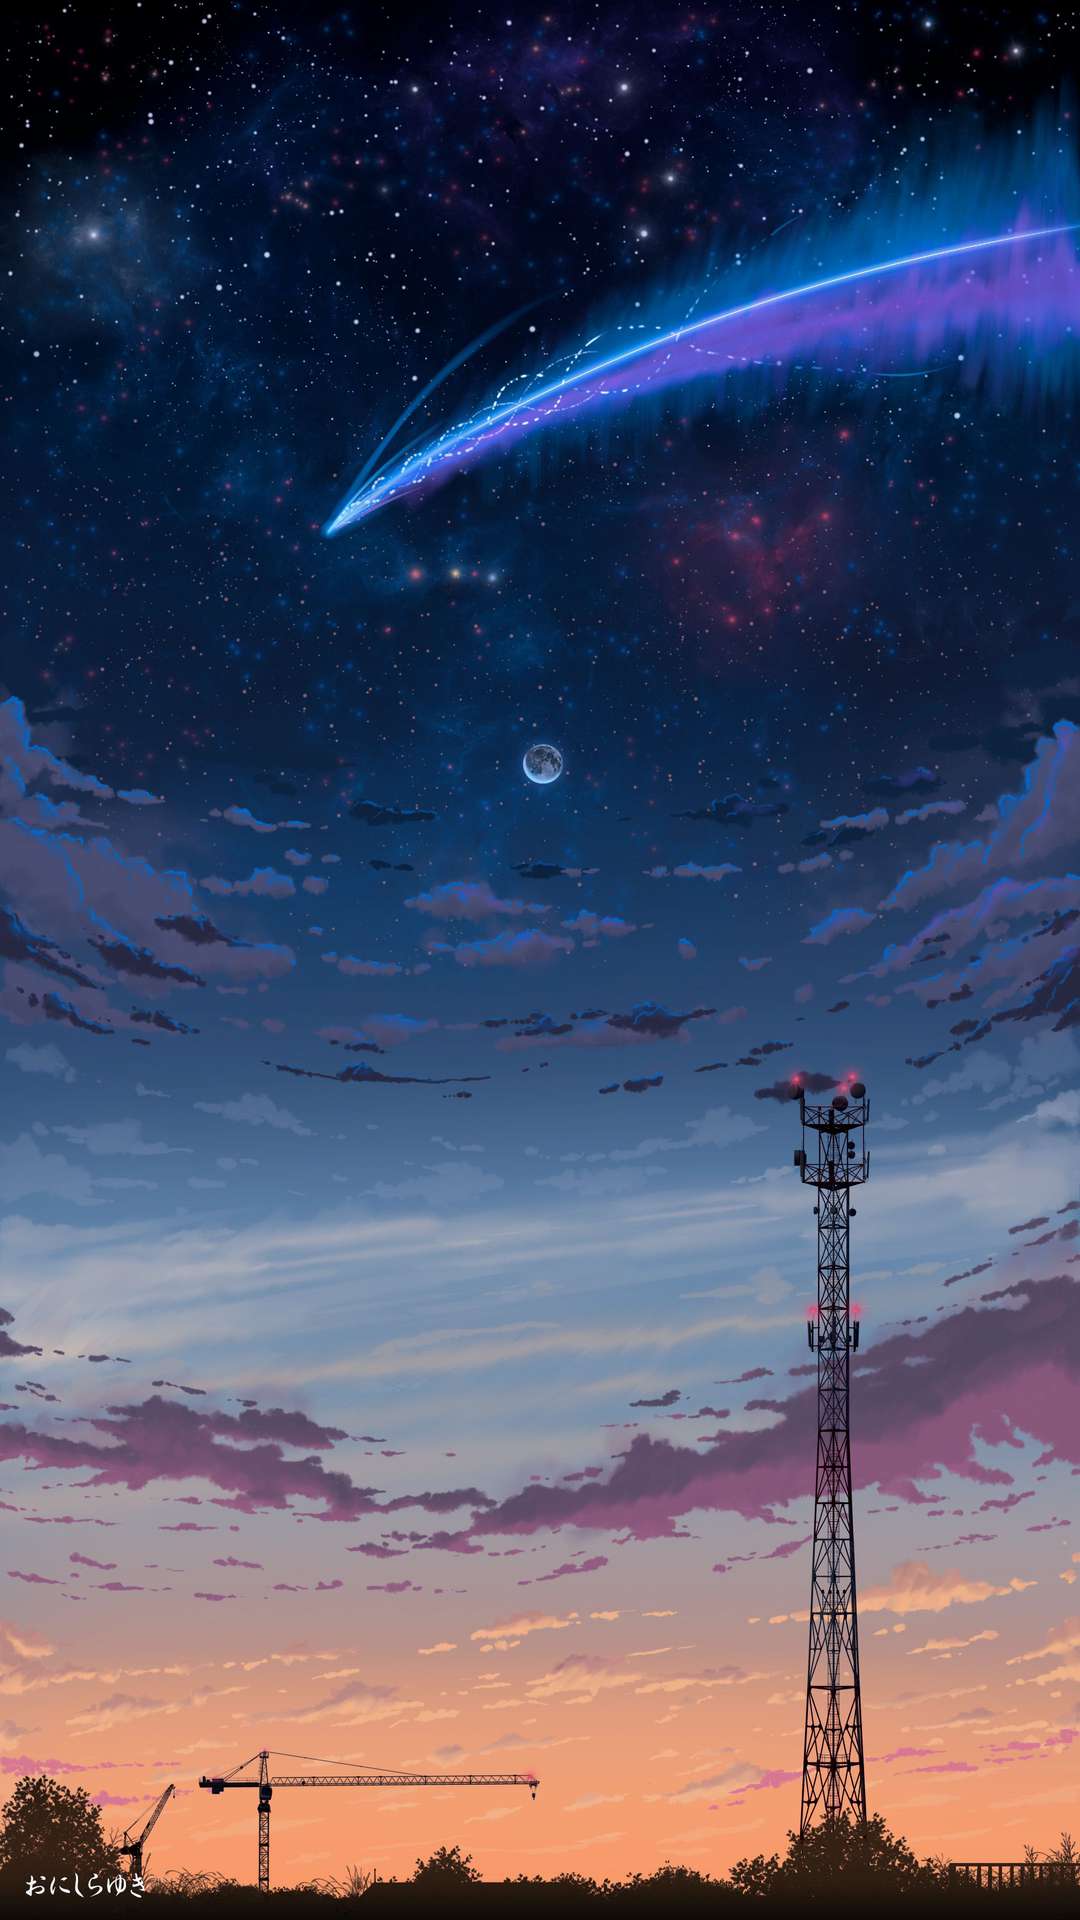 Aesthetic Anime wallpaper by ad0lla  Download on ZEDGE  9af1